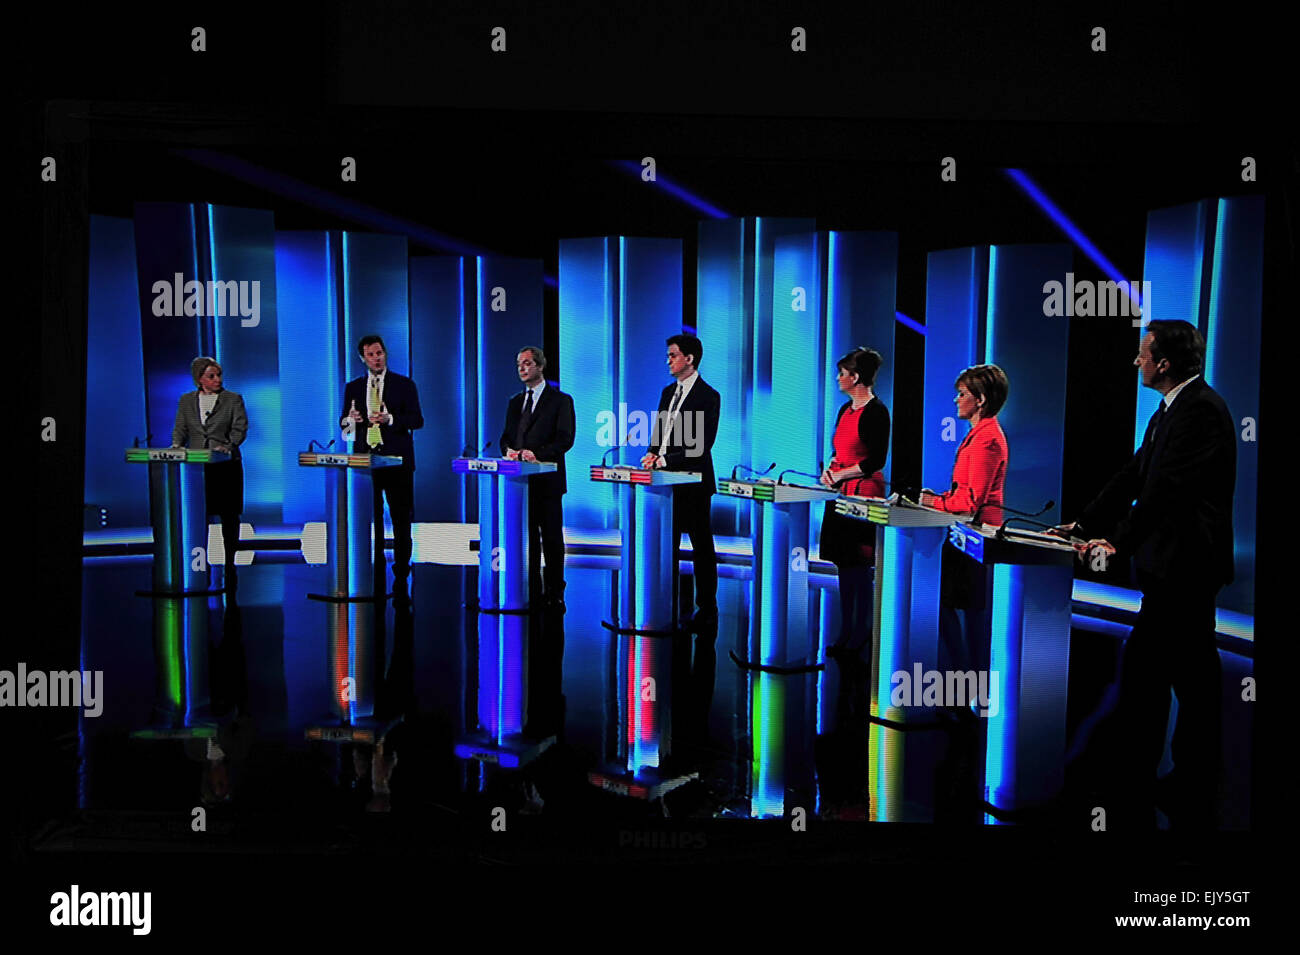 Leaders of the 7 main UK parties participate in the 7-way UK election leaders debate on live TV. Stock Photo